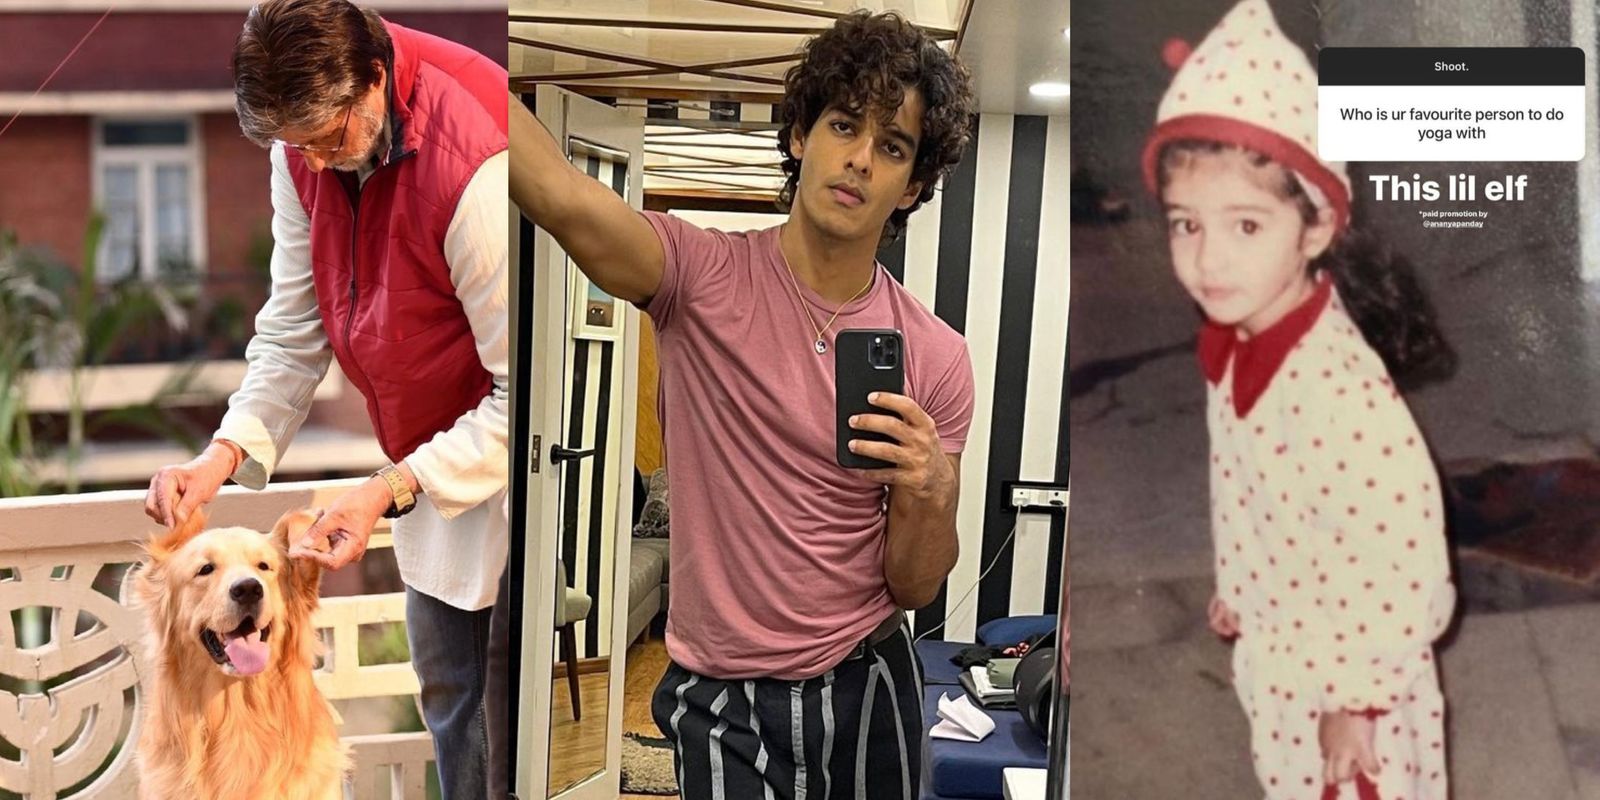 Amitabh Bachchan shares a post featuring his cute co-star; Ishaan Khatter reveals his favorite yoga buddy